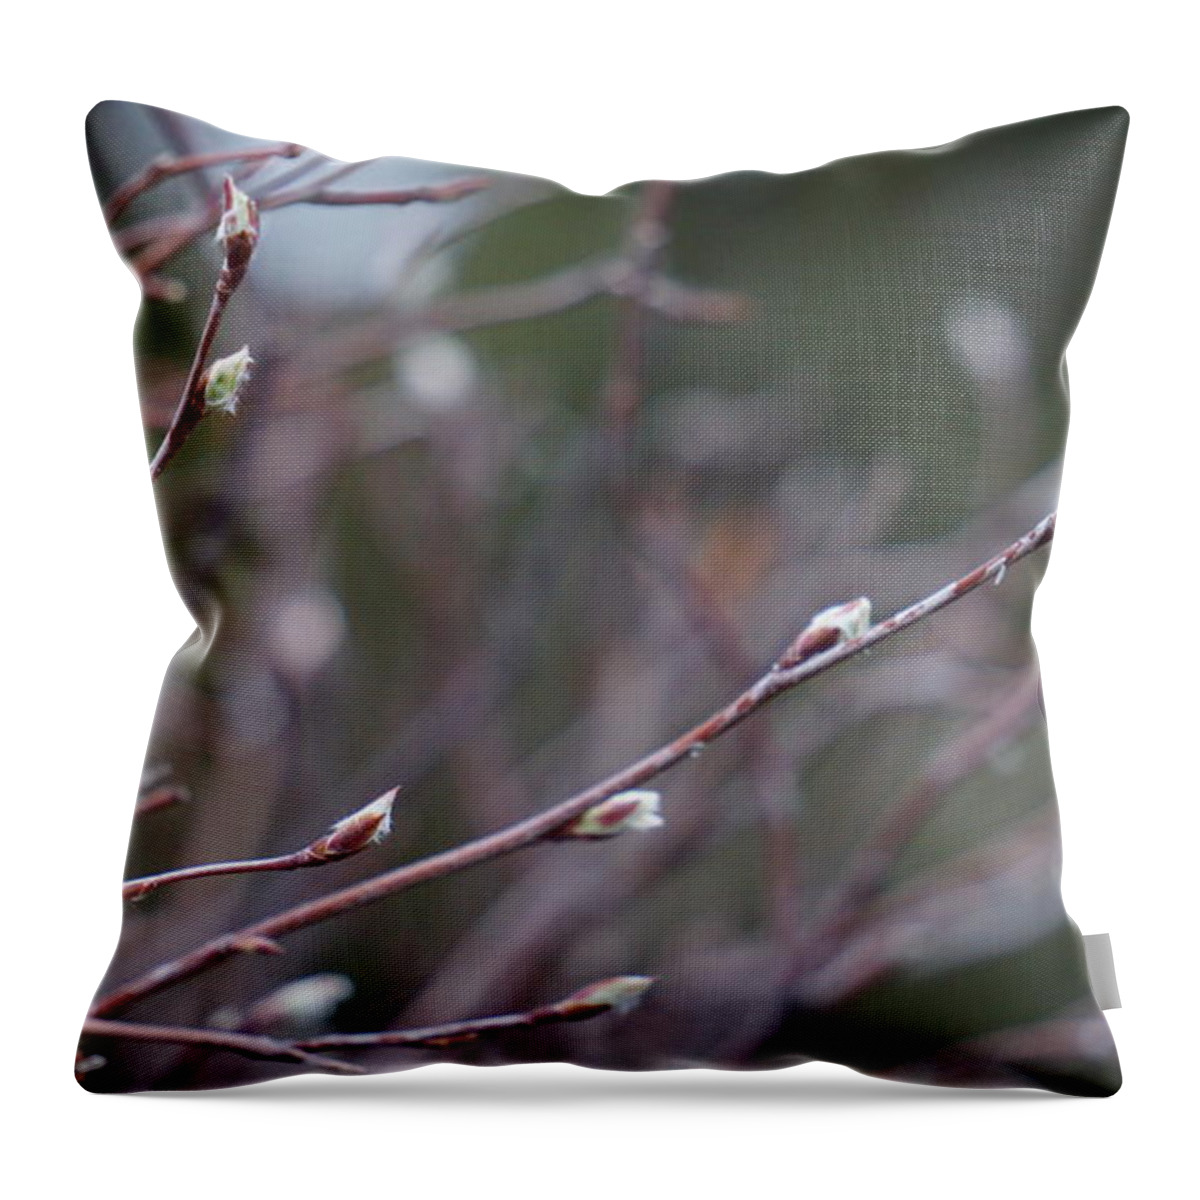 Spring Throw Pillow featuring the photograph Spring Buds by Brooke Bowdren